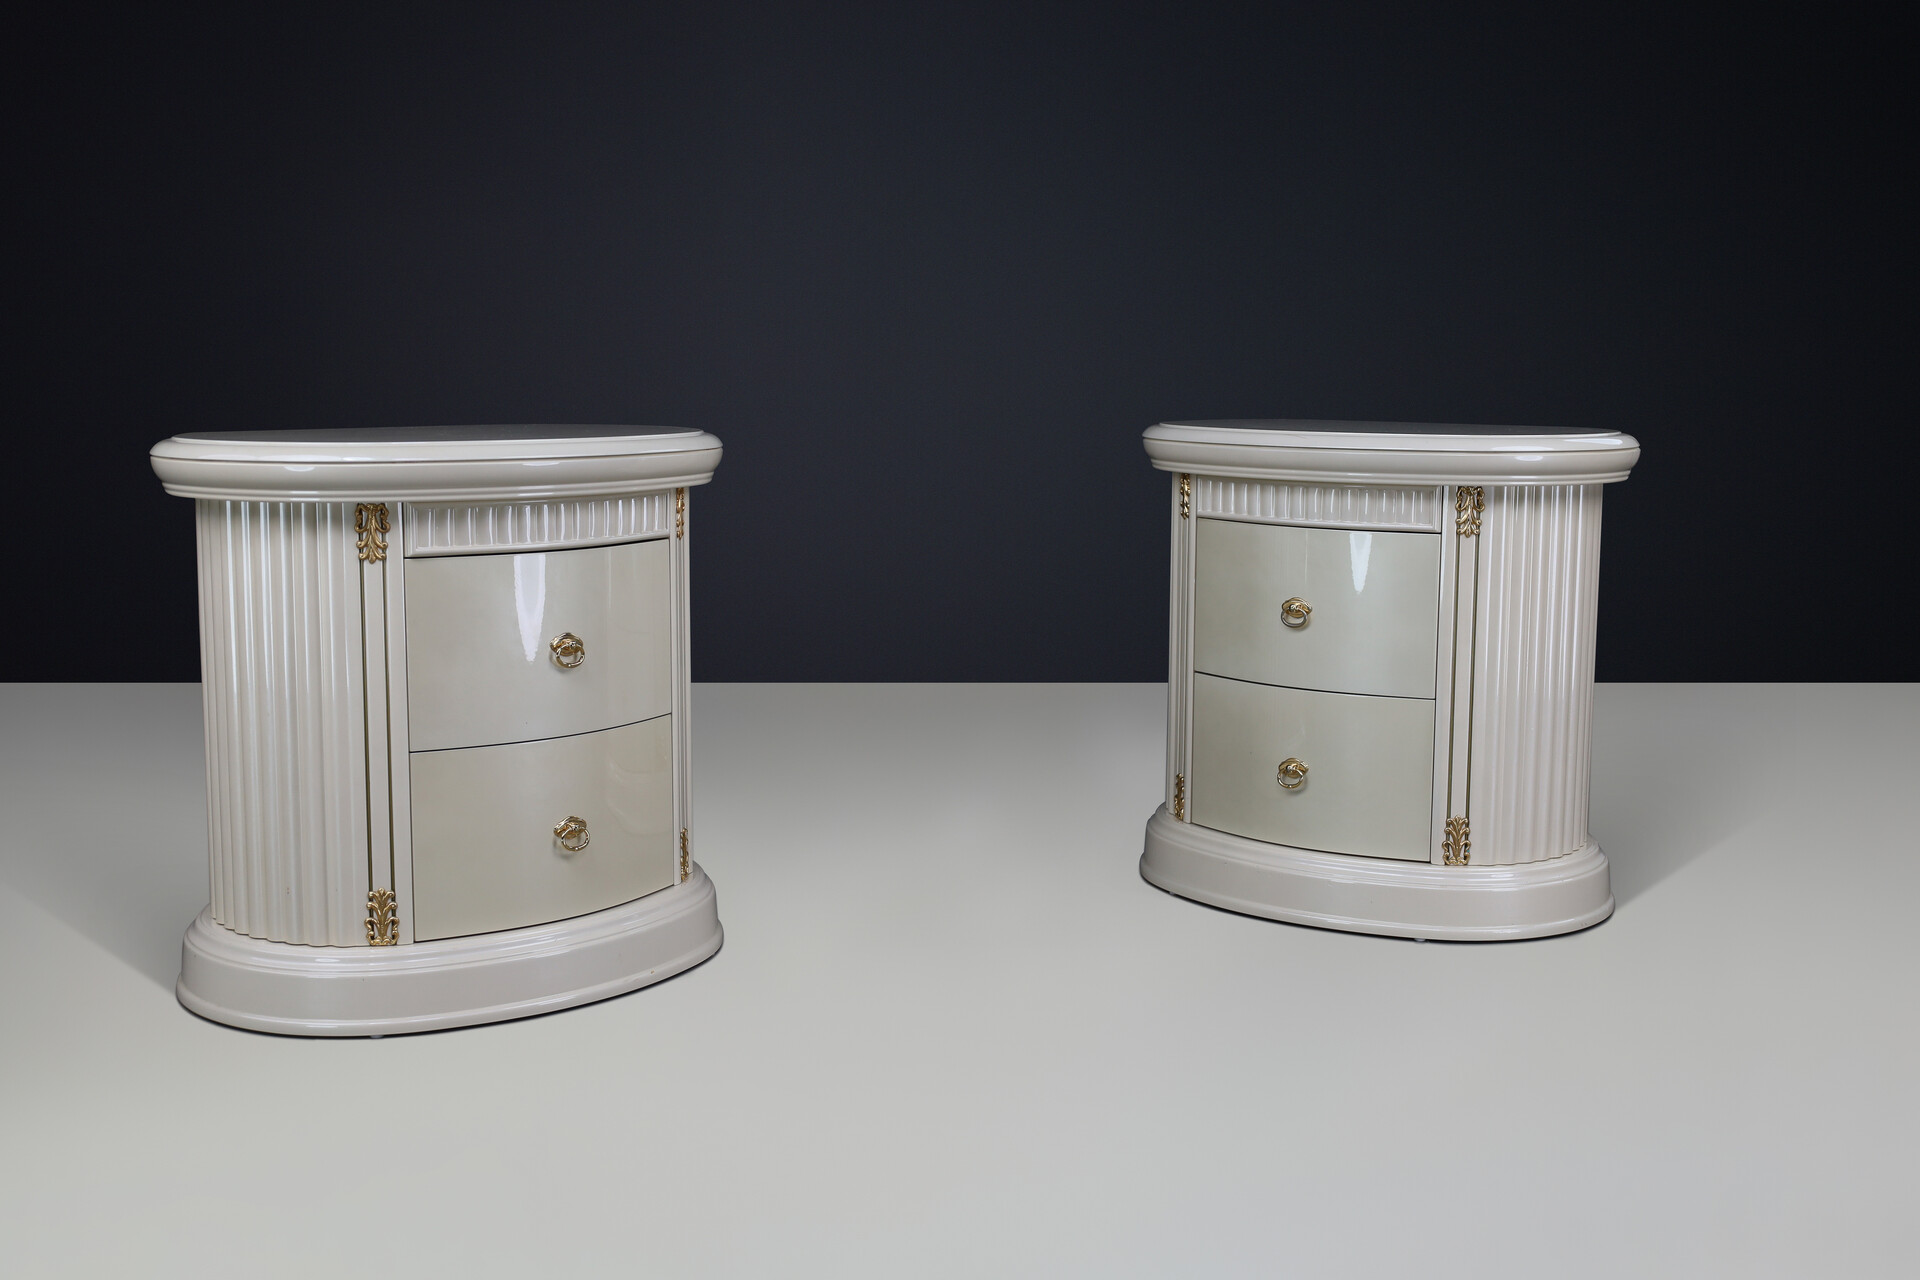 Neoclassical Laquered Cabinets with drawers, Italy 1980s Late-20th century